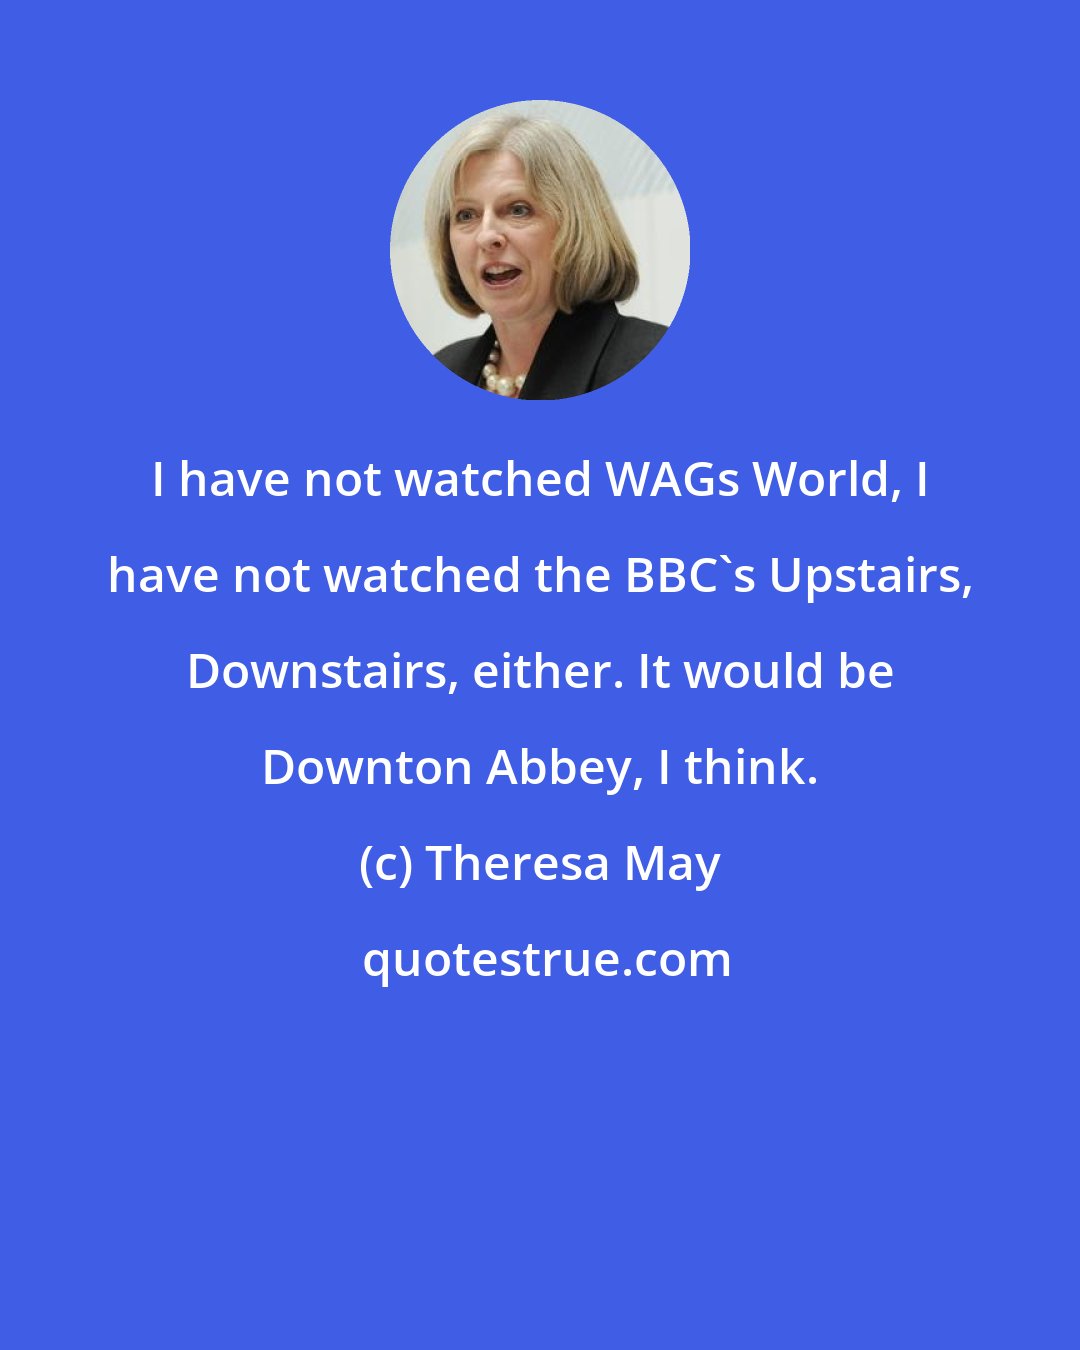 Theresa May: I have not watched WAGs World, I have not watched the BBC's Upstairs, Downstairs, either. It would be Downton Abbey, I think.